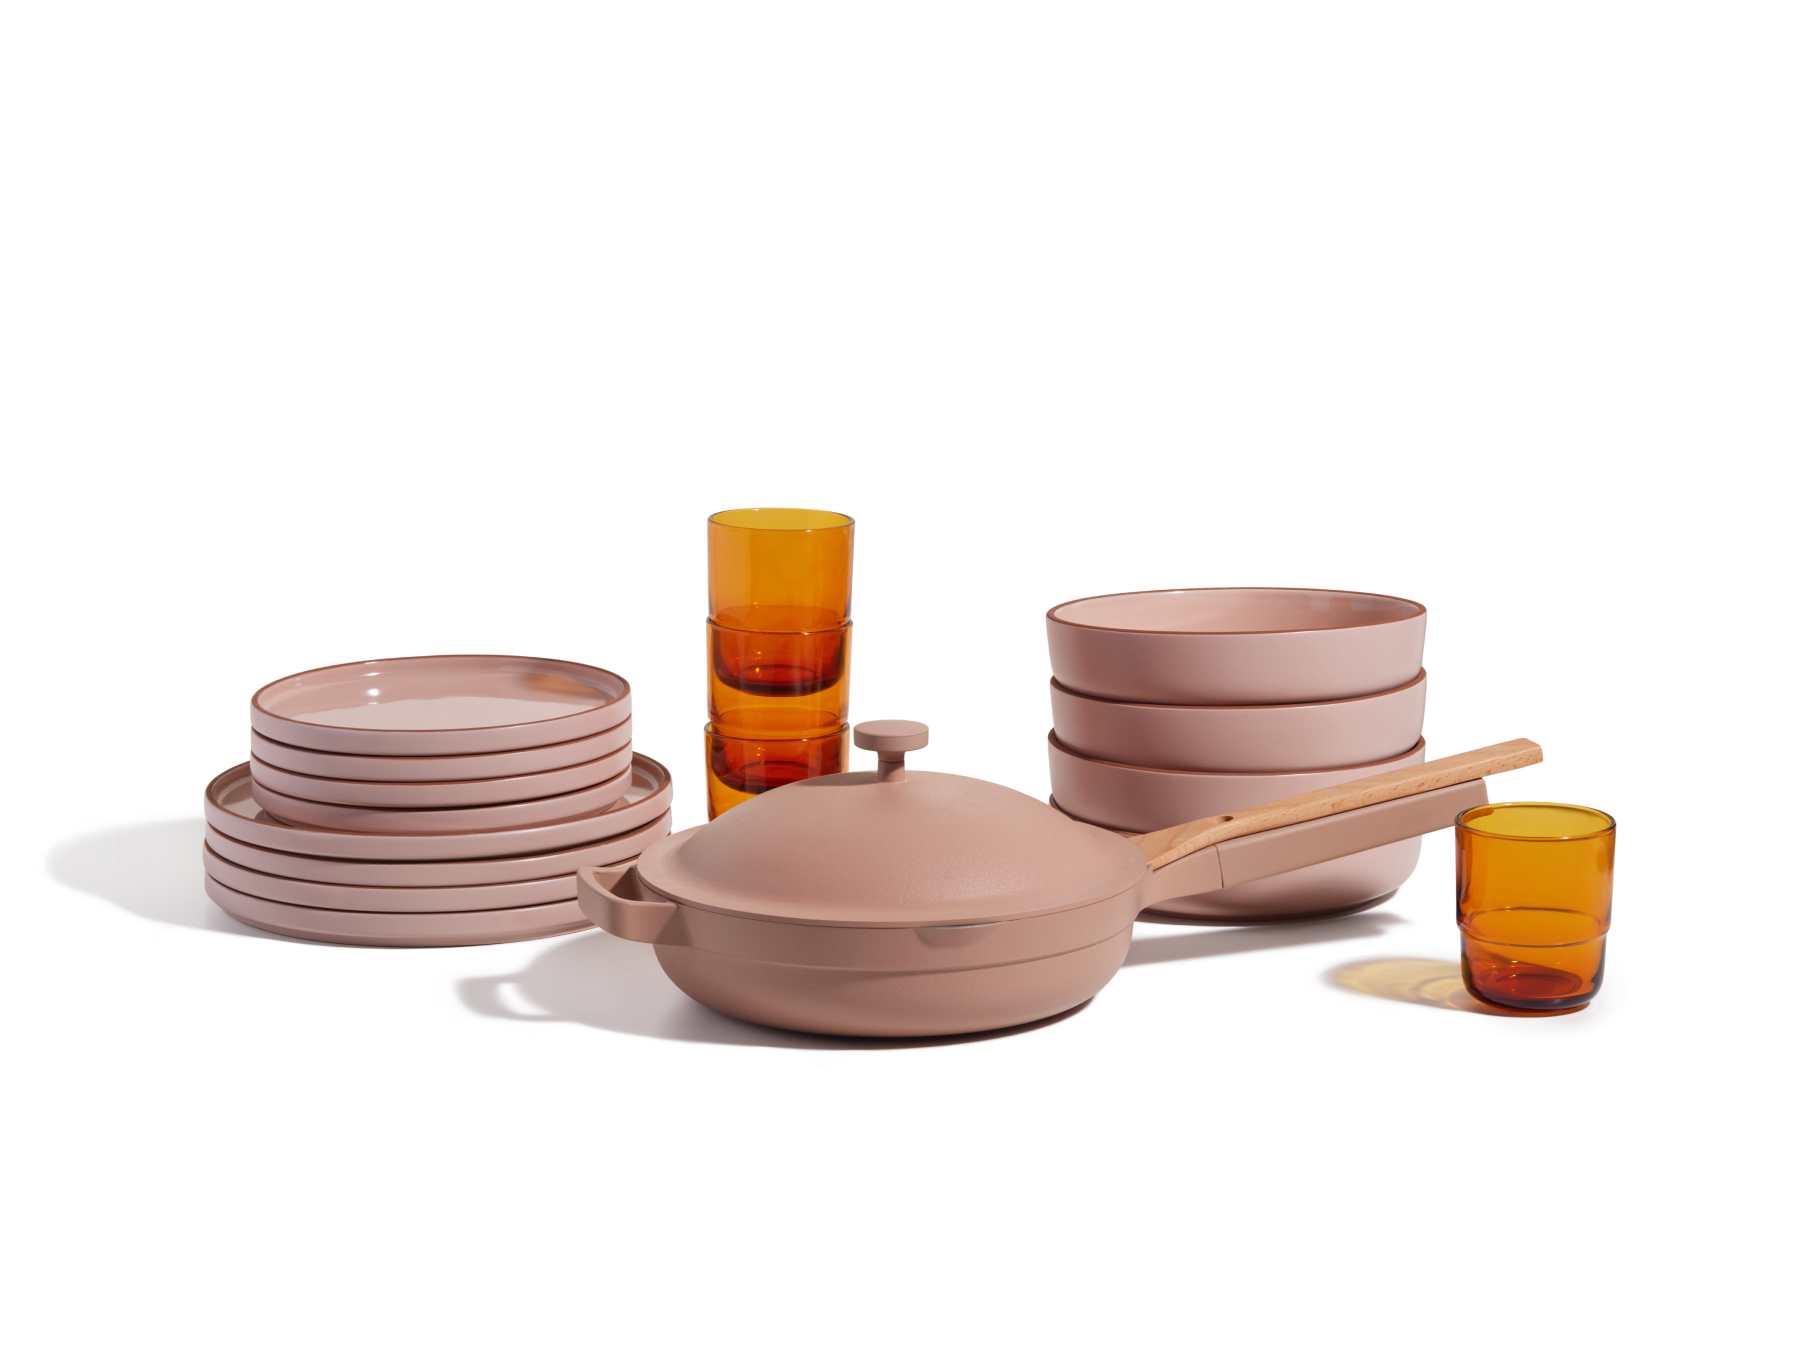 http://cdn.shopify.com/s/files/1/0024/4137/9915/products/Tableware_Bundle_DinnerFor4_Spice_1.png?v=1663642337